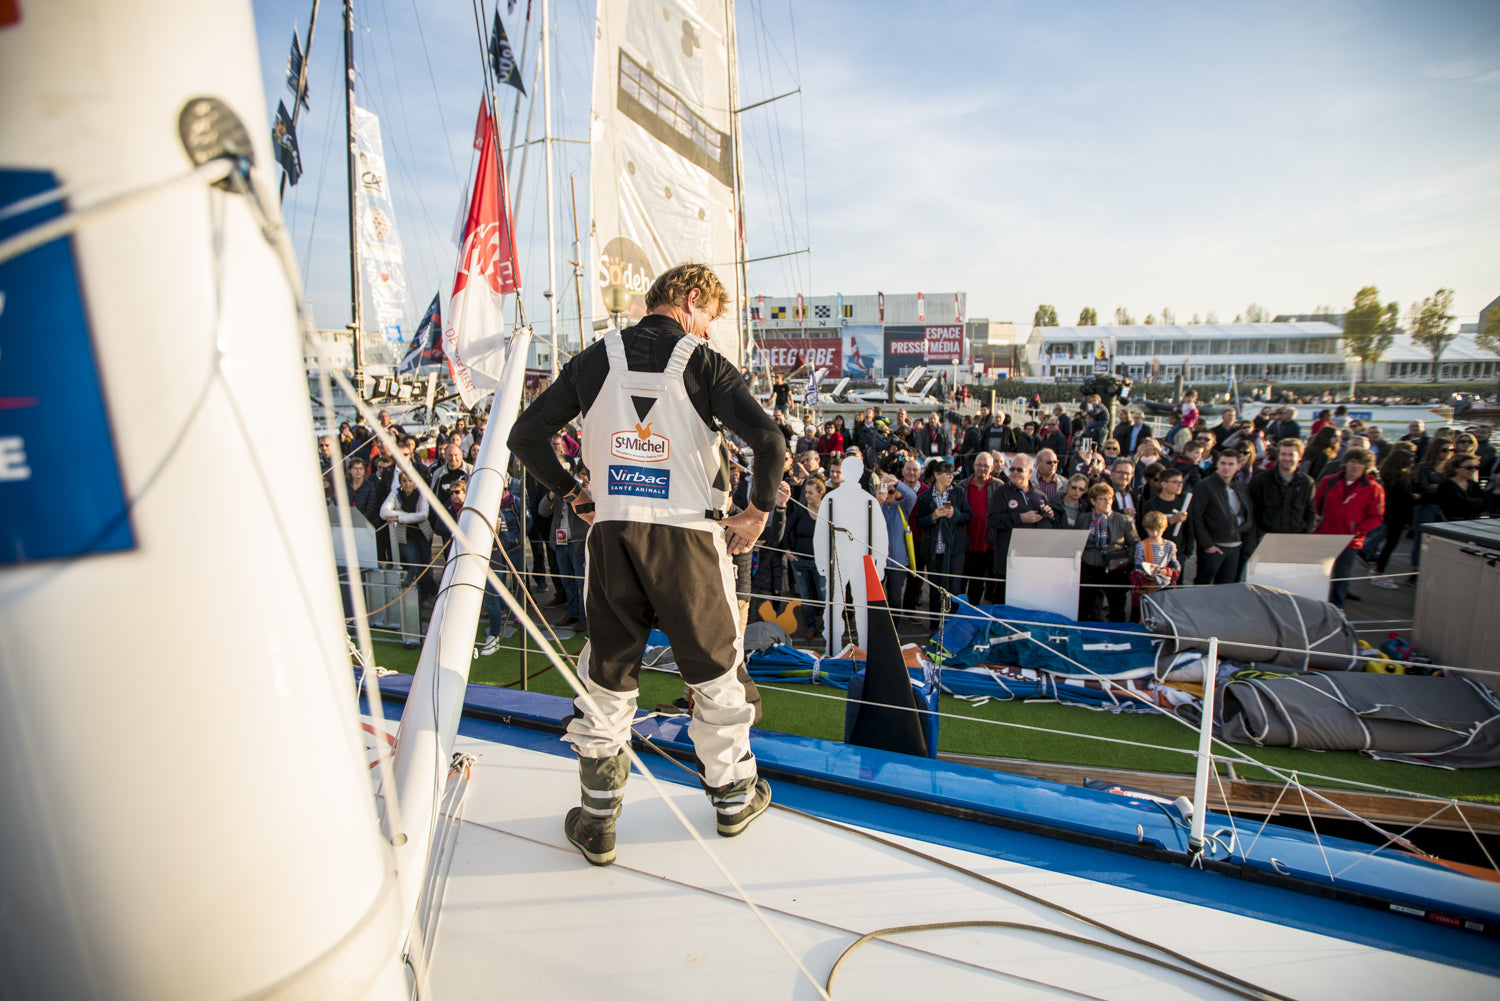 FRENCH TRIO DUKE IT OUT IN TRIPLE-THREAT VENDÉE GLOBE FINISH